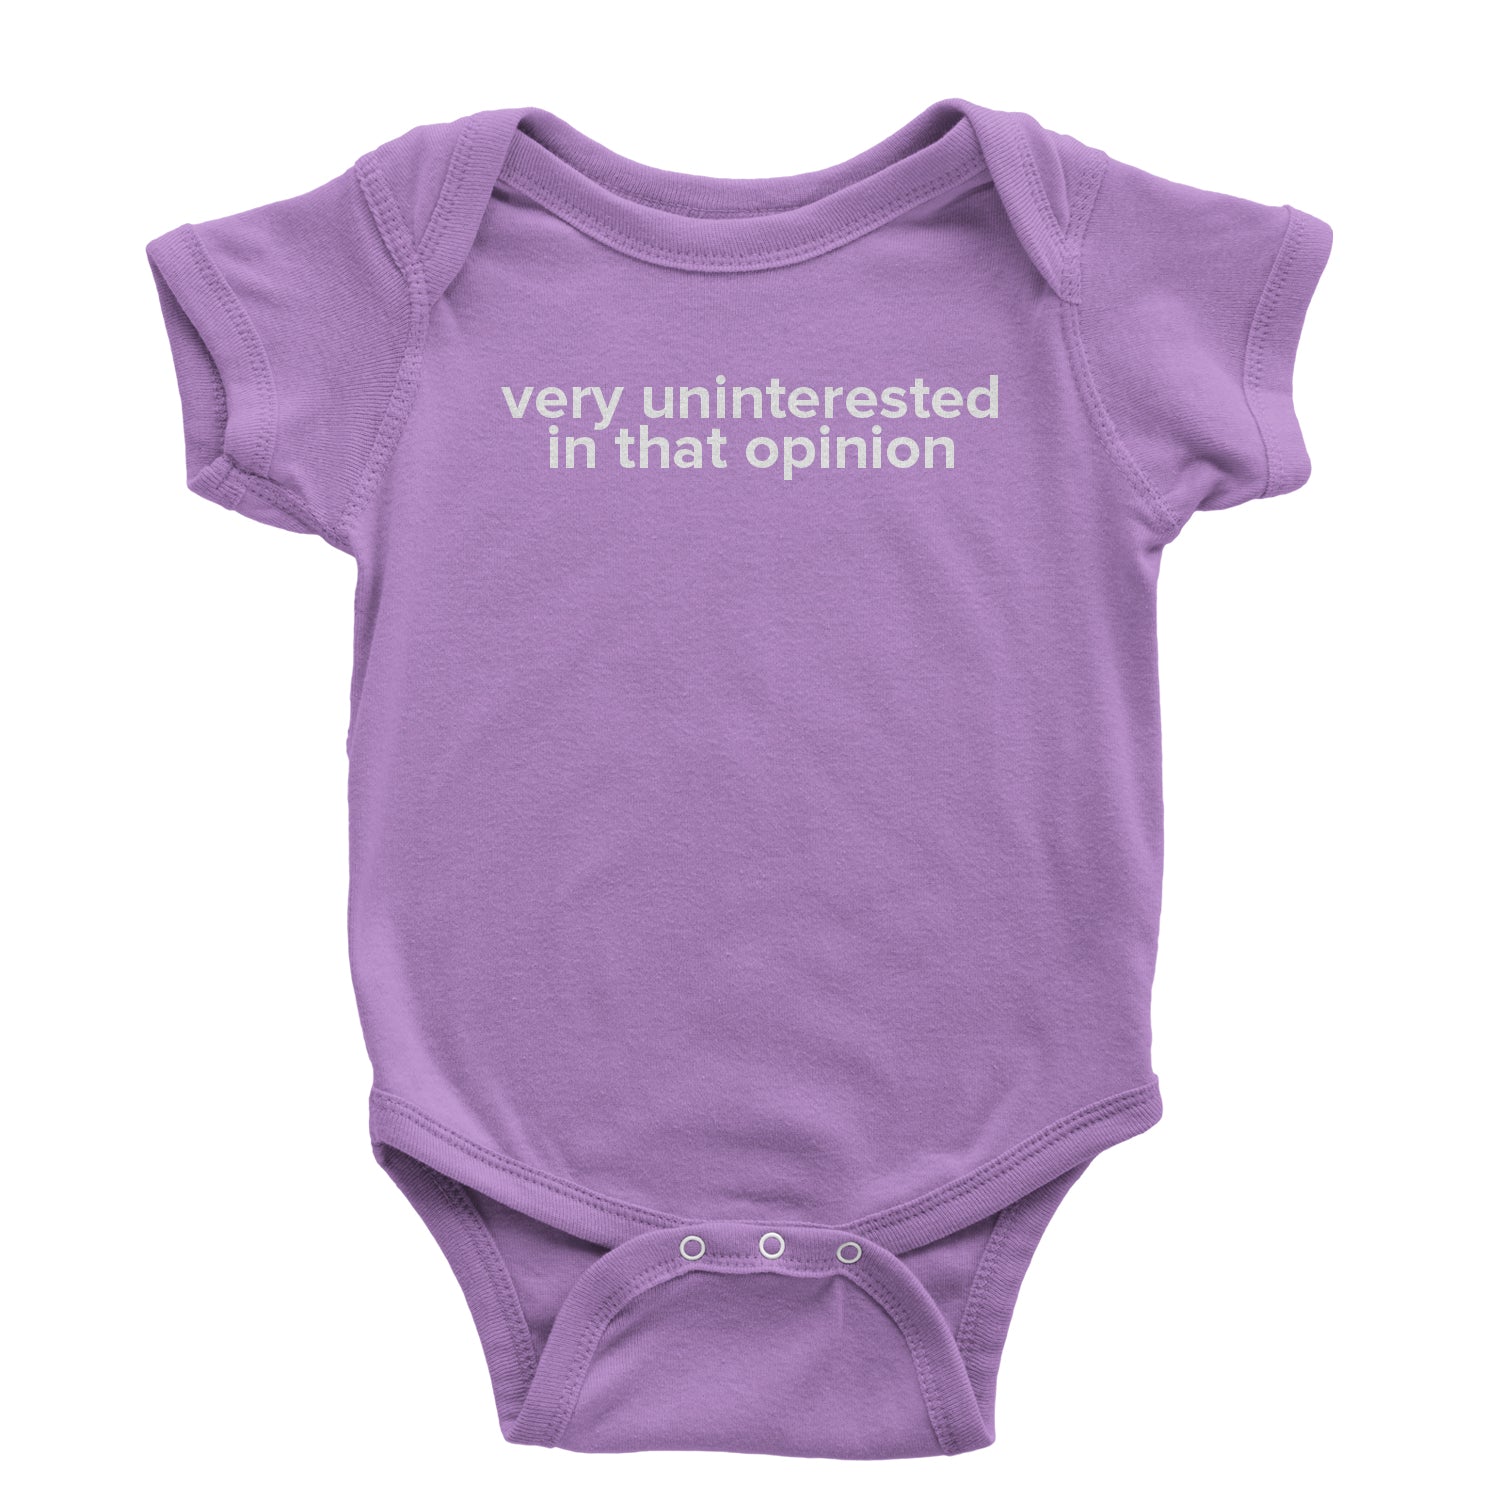 Very Uninterested In That Opinion Infant One-Piece Romper Bodysuit alexis, creek, d, schitt, schitts by Expression Tees